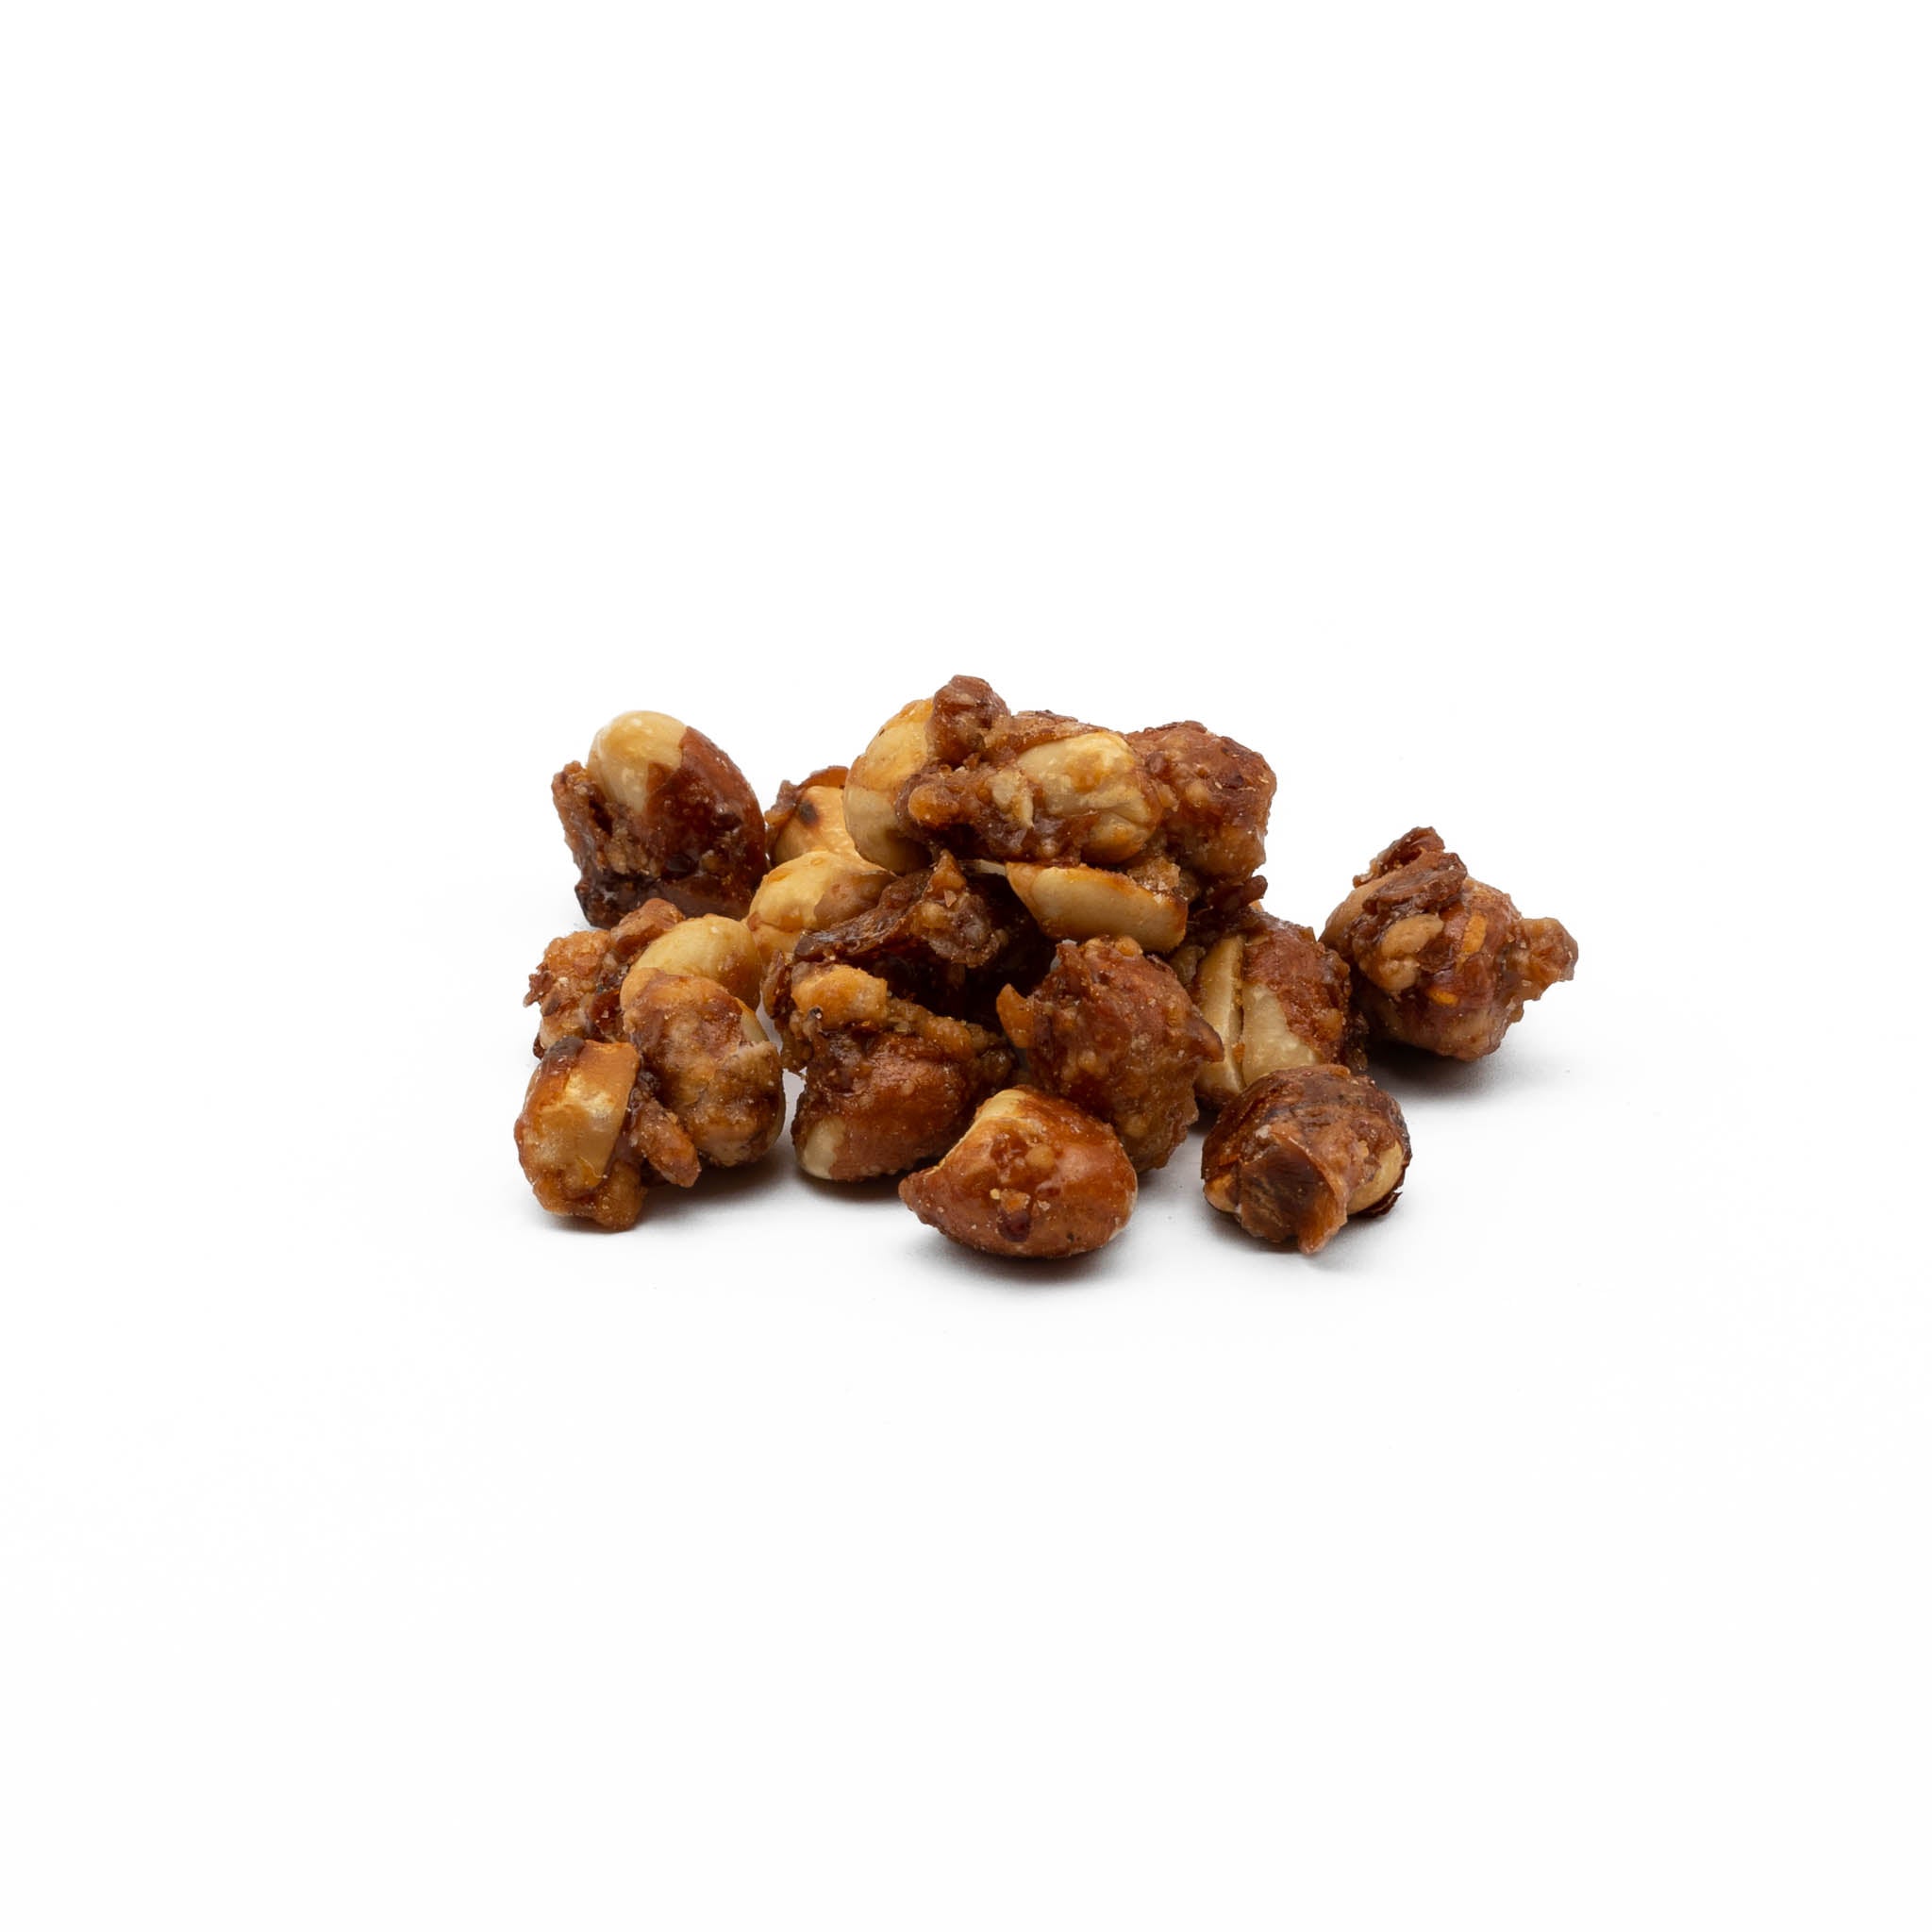 Australian peanuts with a sweet and crunchy toffee coating